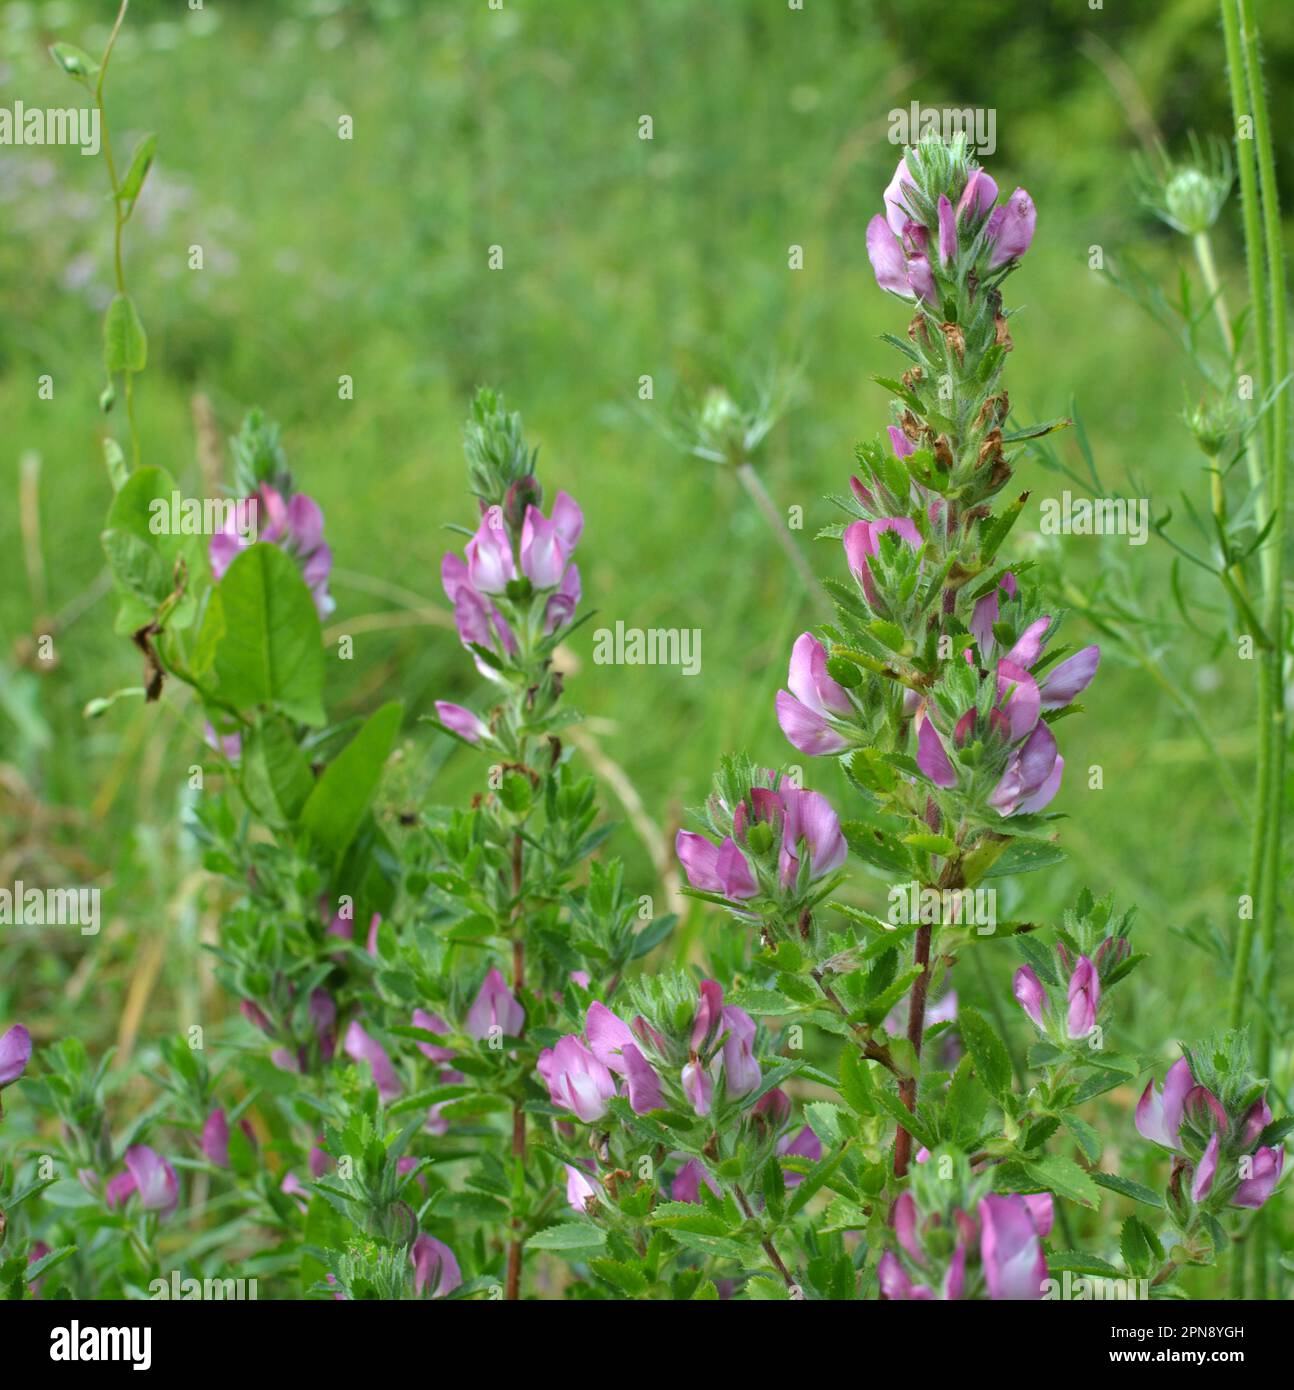 Ononis spinosa grows among grasses in the wild Stock Photo